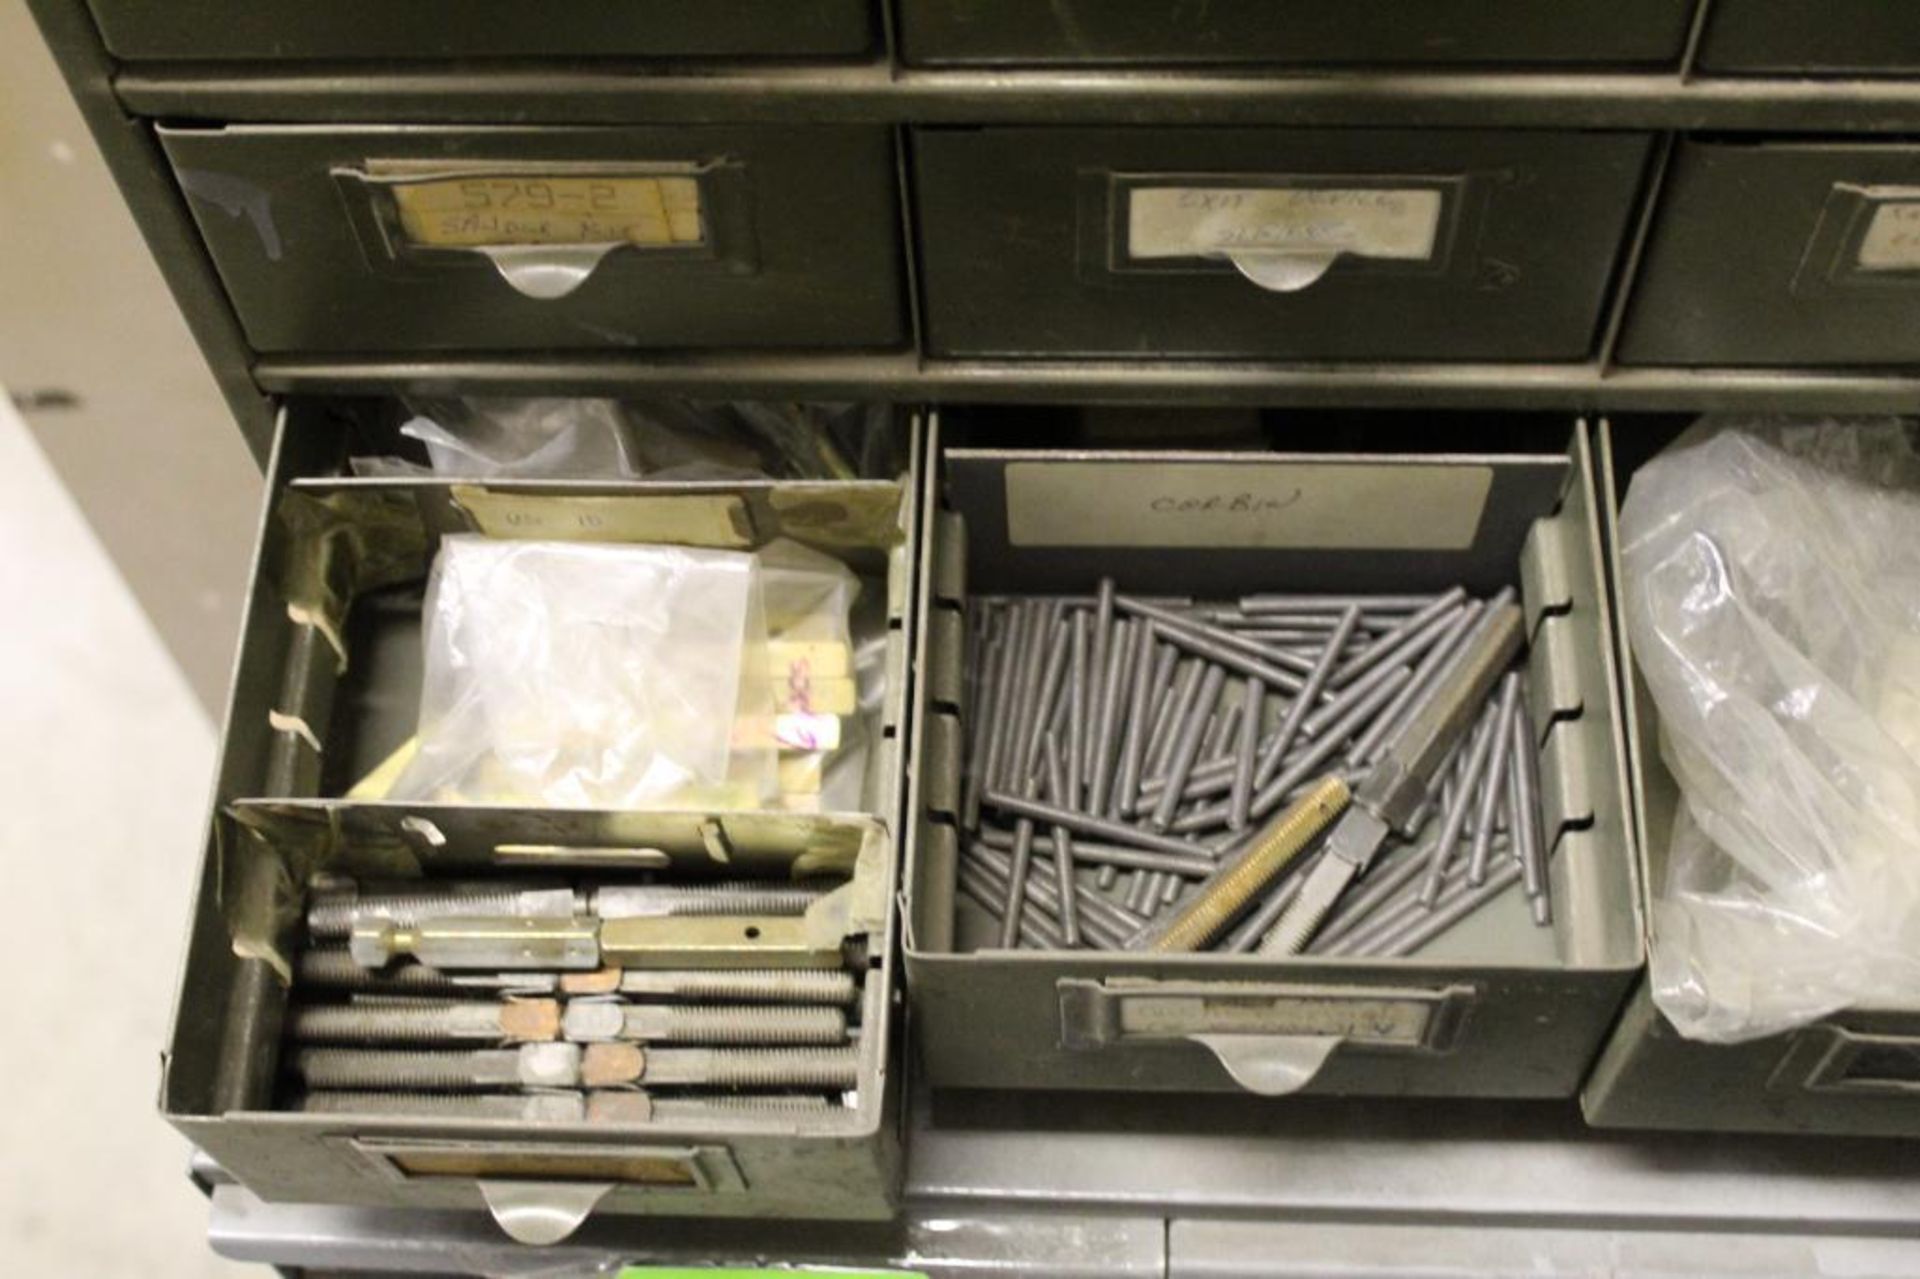 18-Drawer Organizer With Contents to Include Strikes and Spindles - Image 3 of 15